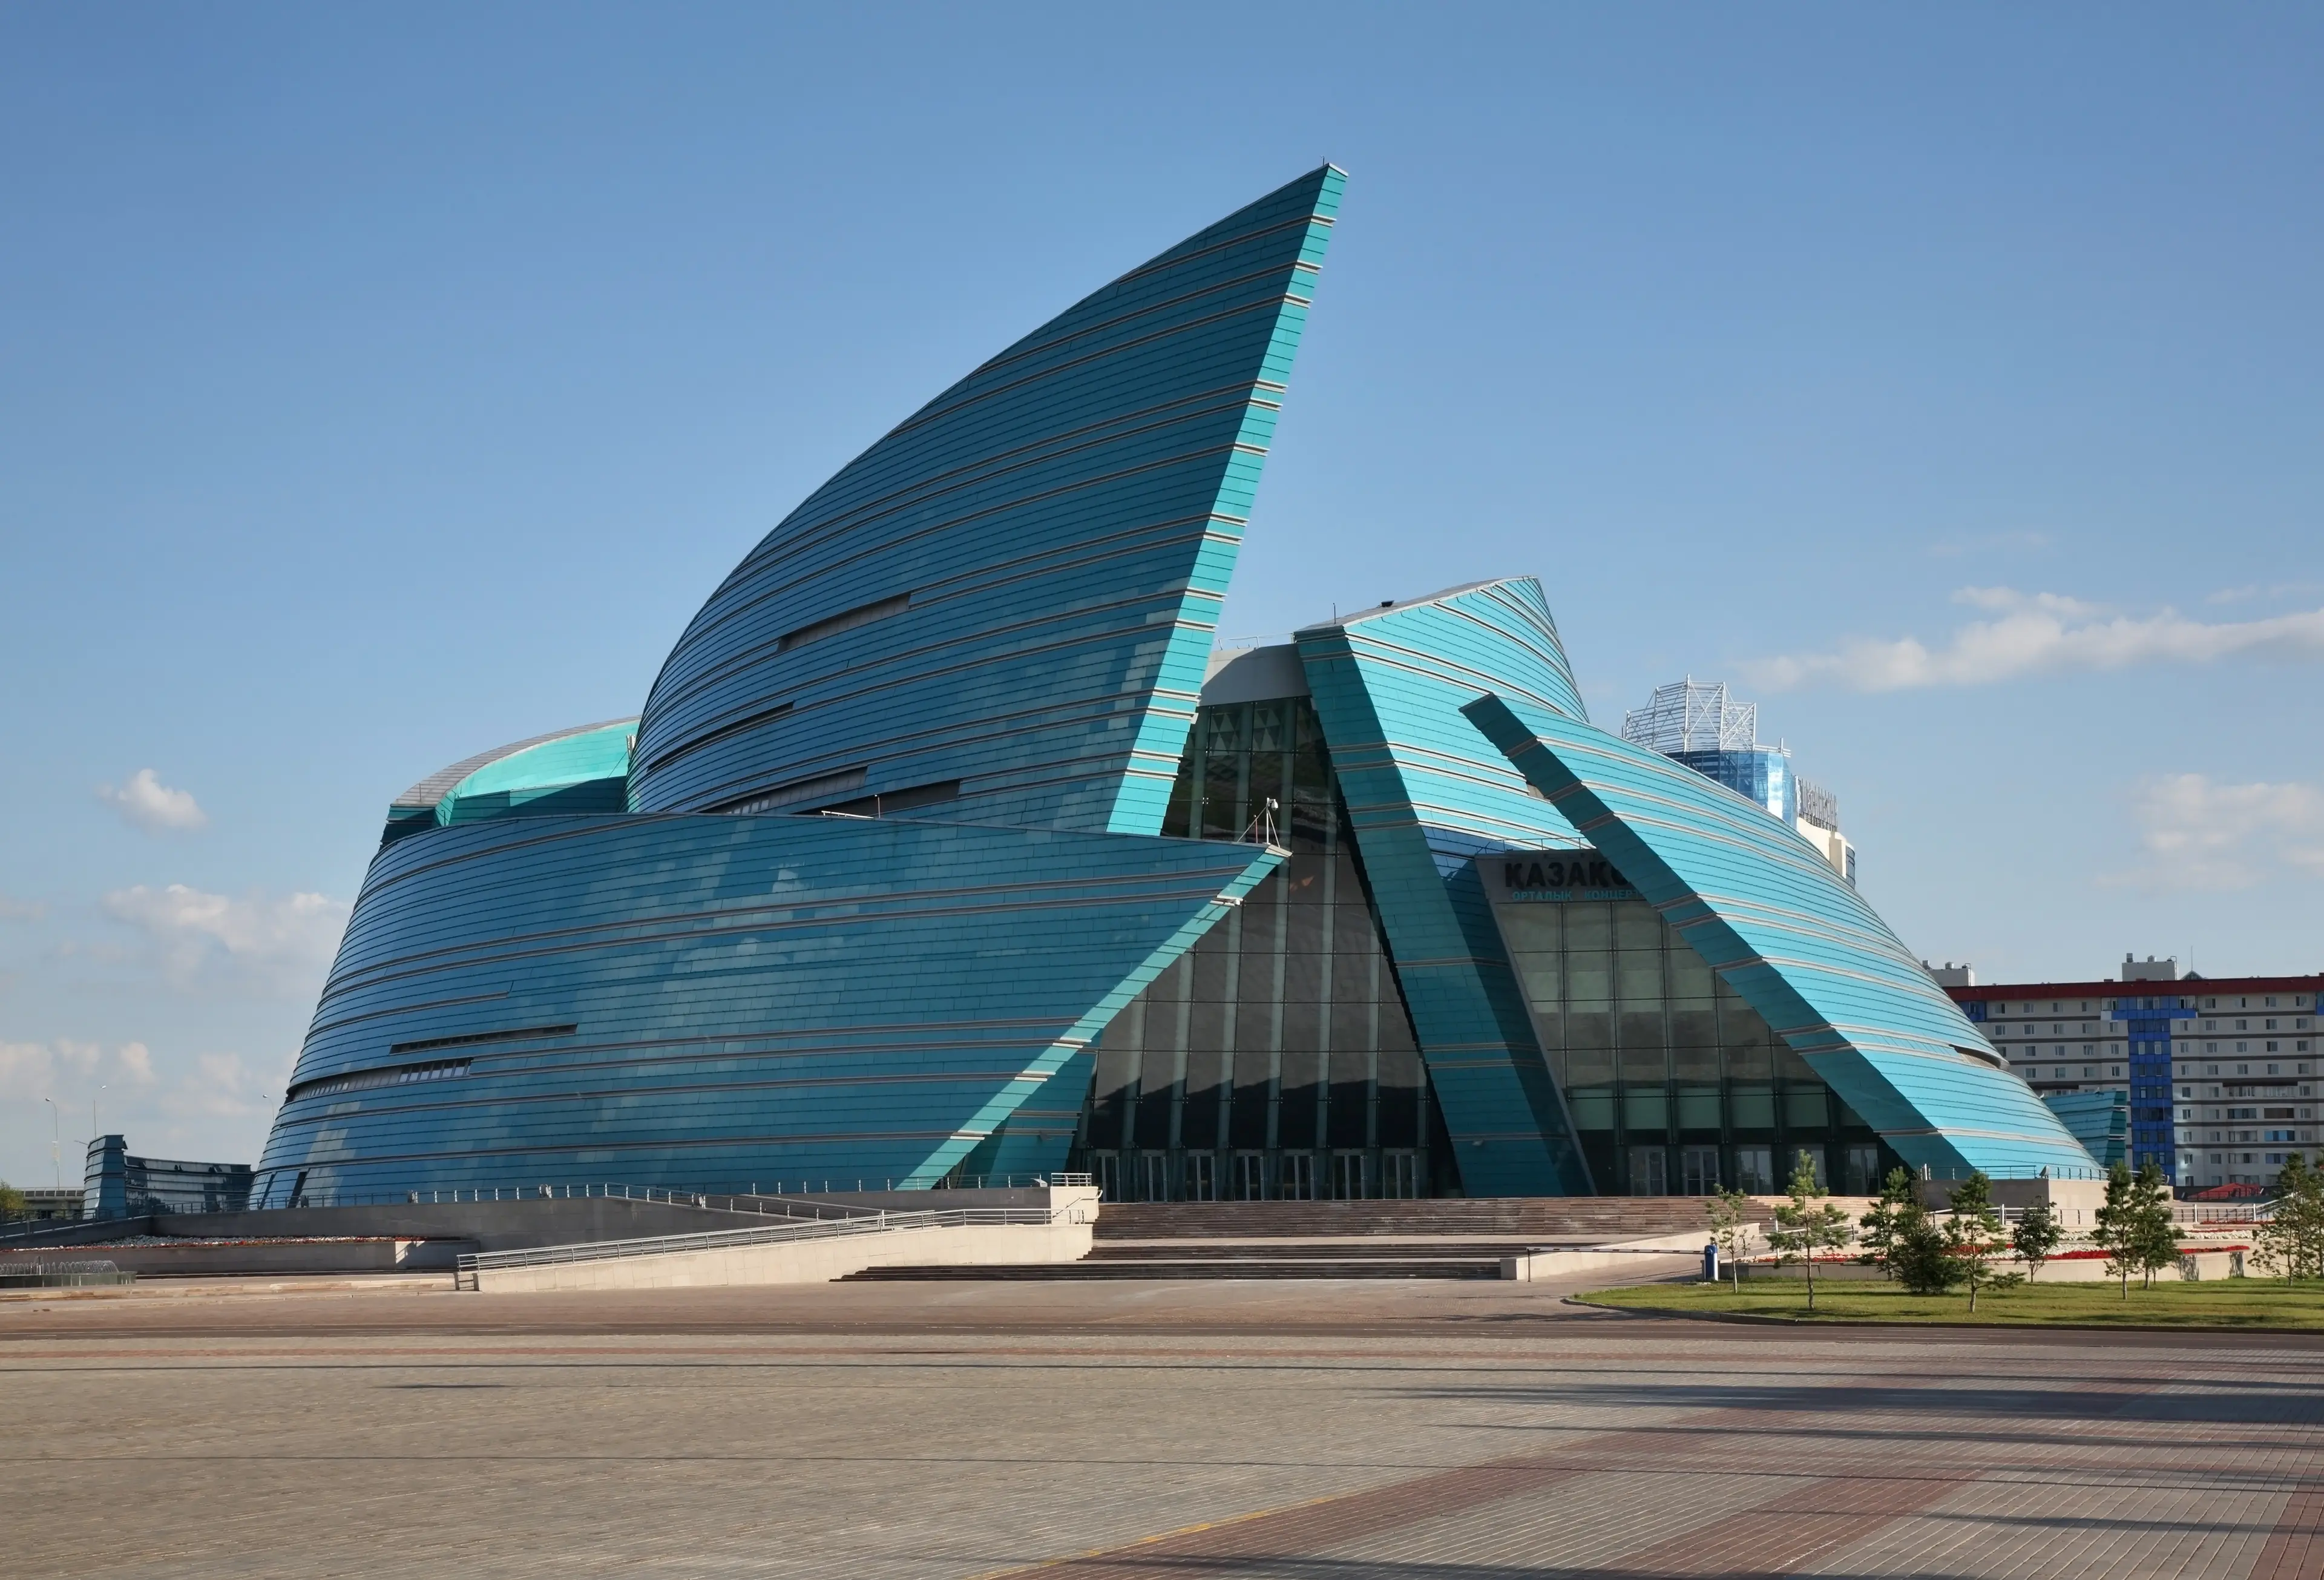 3-Day Family Adventure and Sightseeing in Astana, Kazakhstan